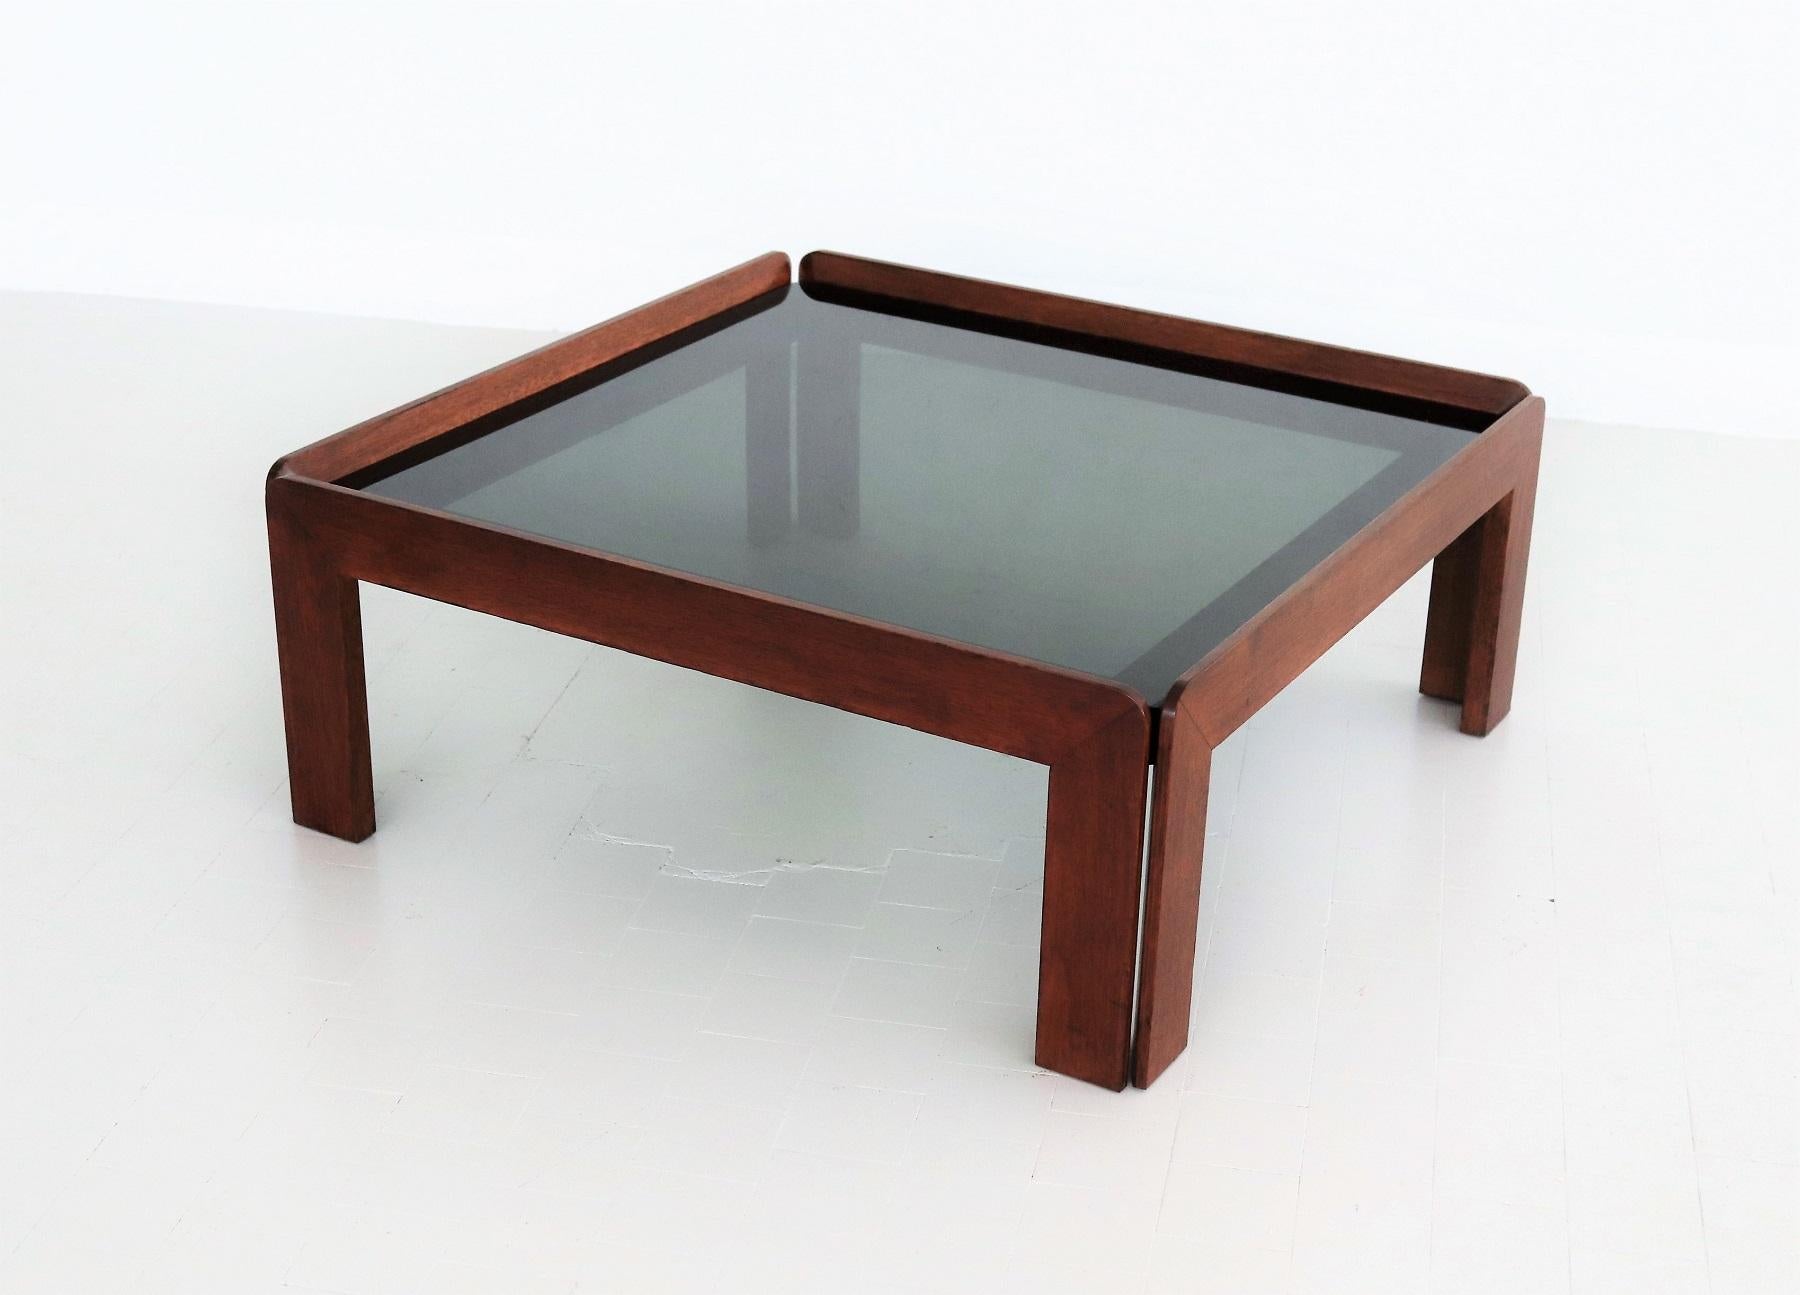 Mid-Century Modern Italian Midcentury Square Coffee Table in Beechwood and Smoked Glass, 1960s For Sale